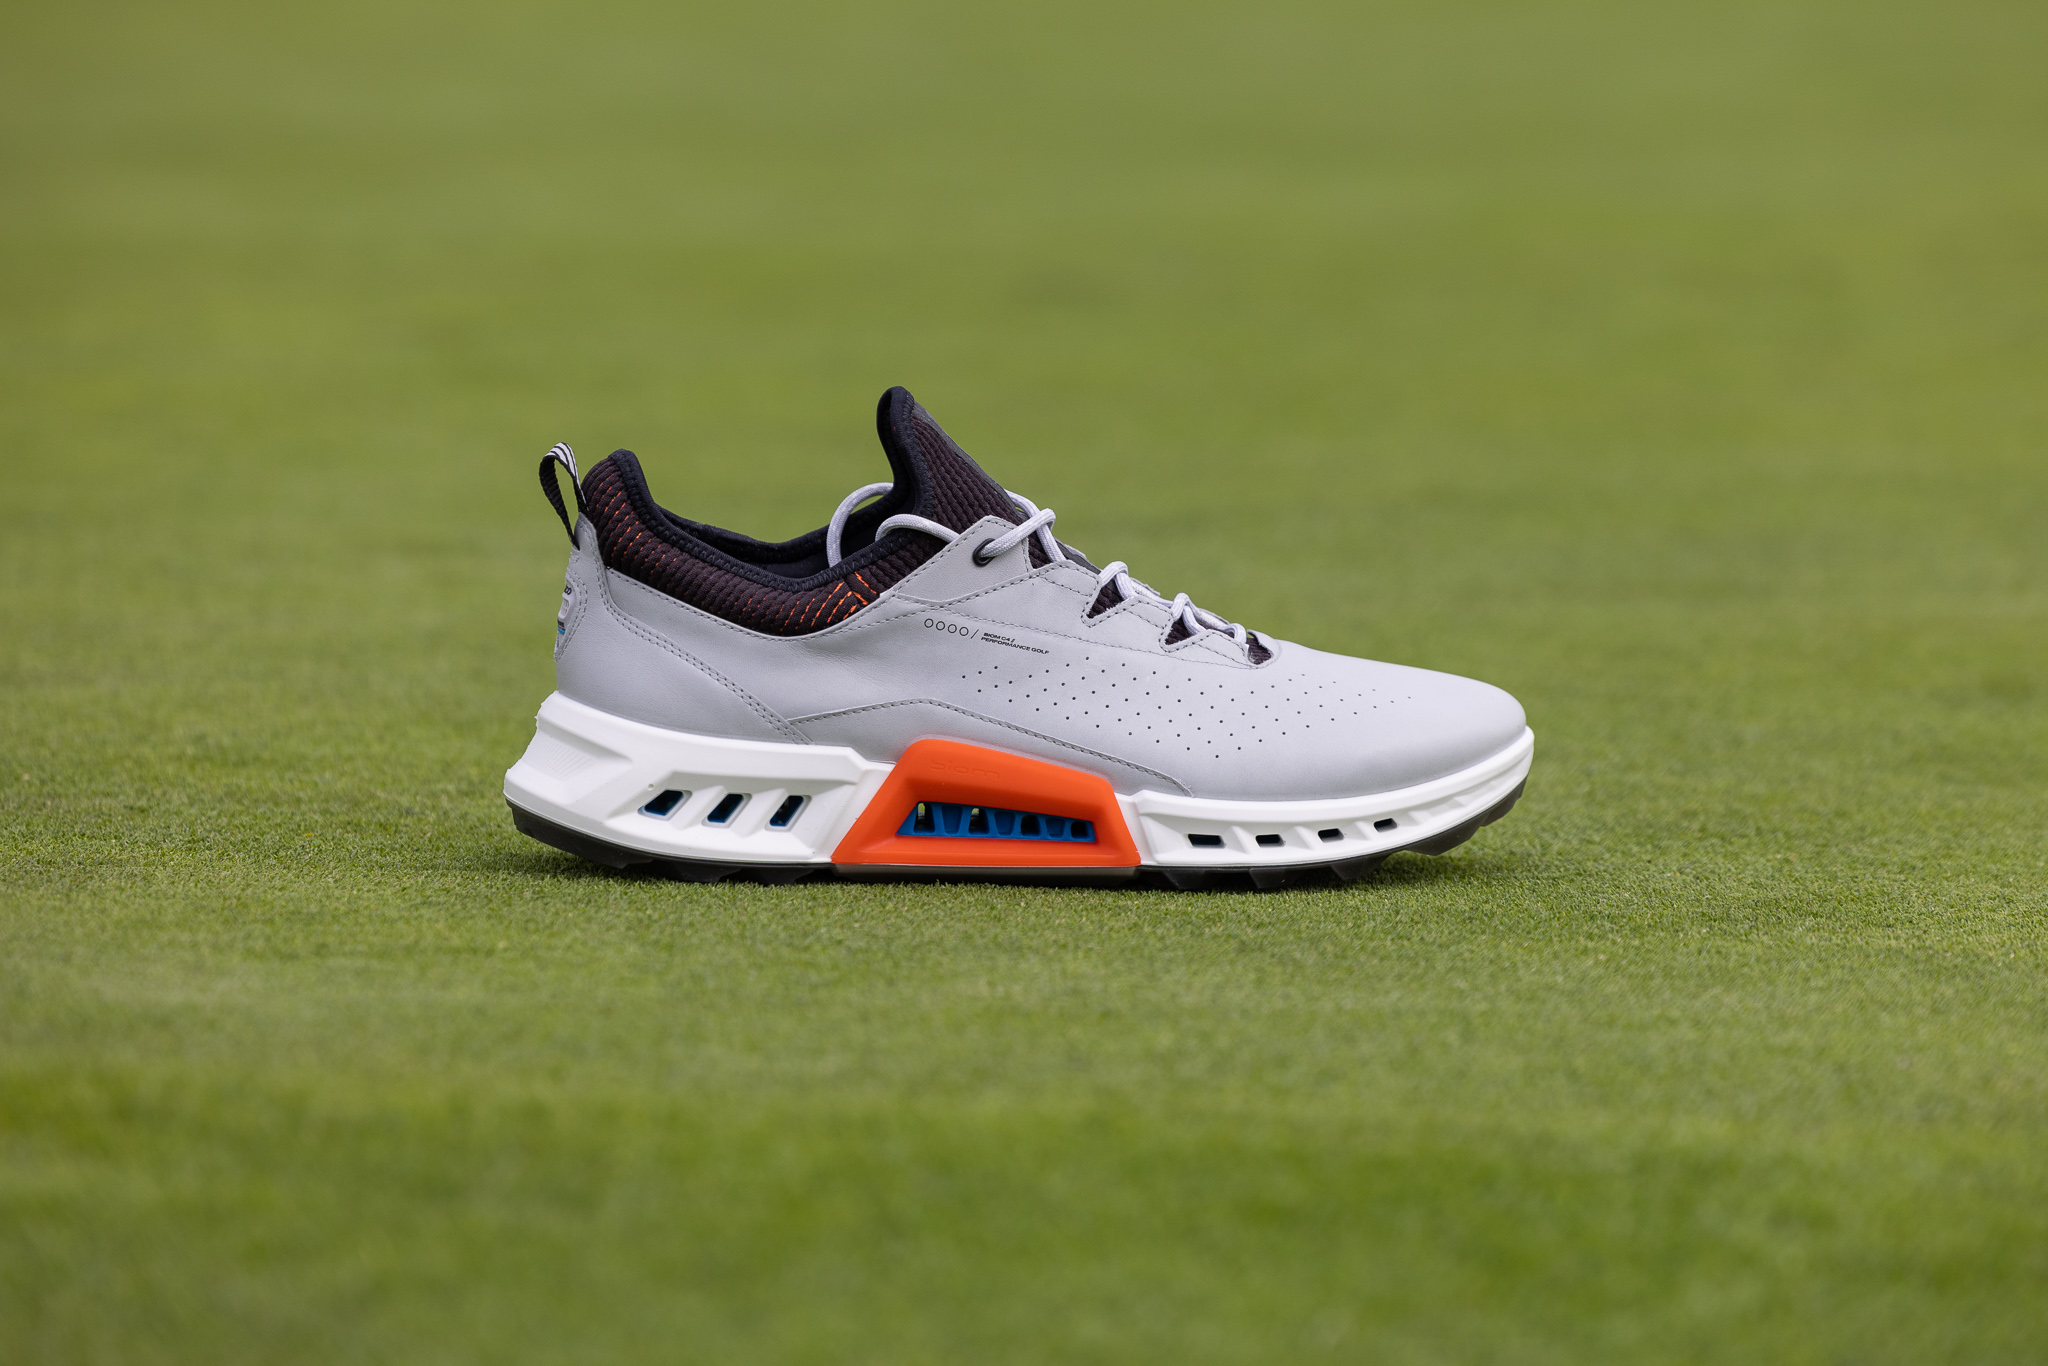 Ambacht Pracht bunker Ecco Biom C4 Review: The Best Golf Shoe I've Ever Owned -